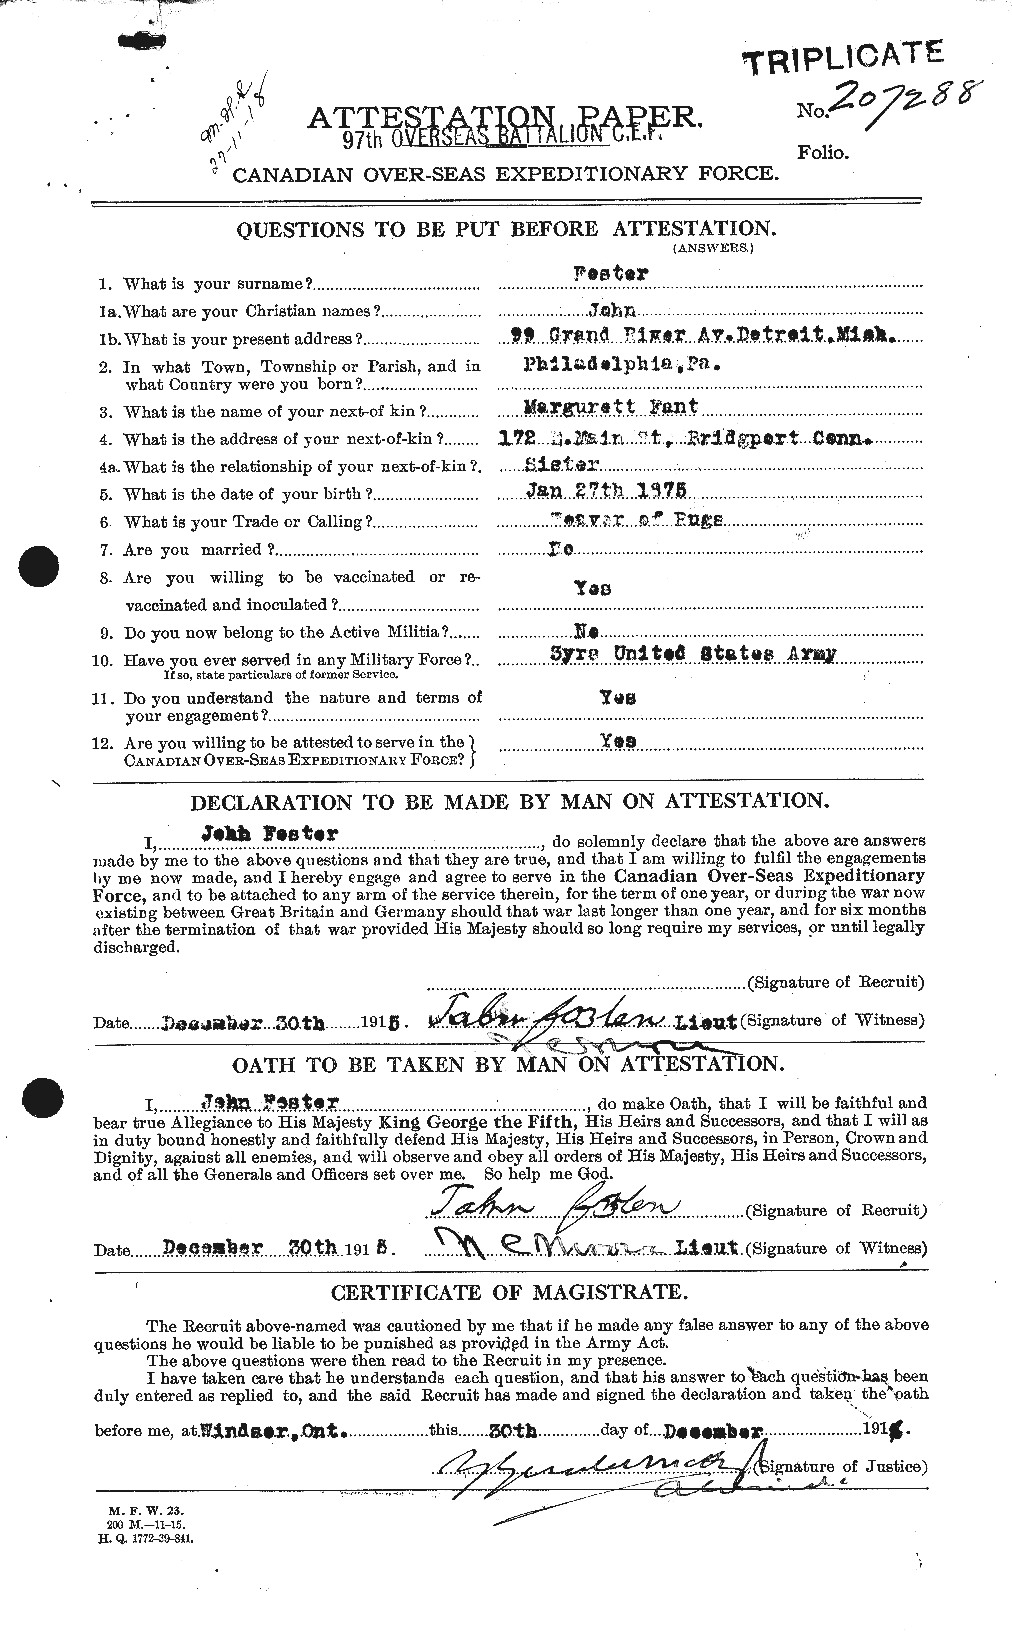 Personnel Records of the First World War - CEF 333341a